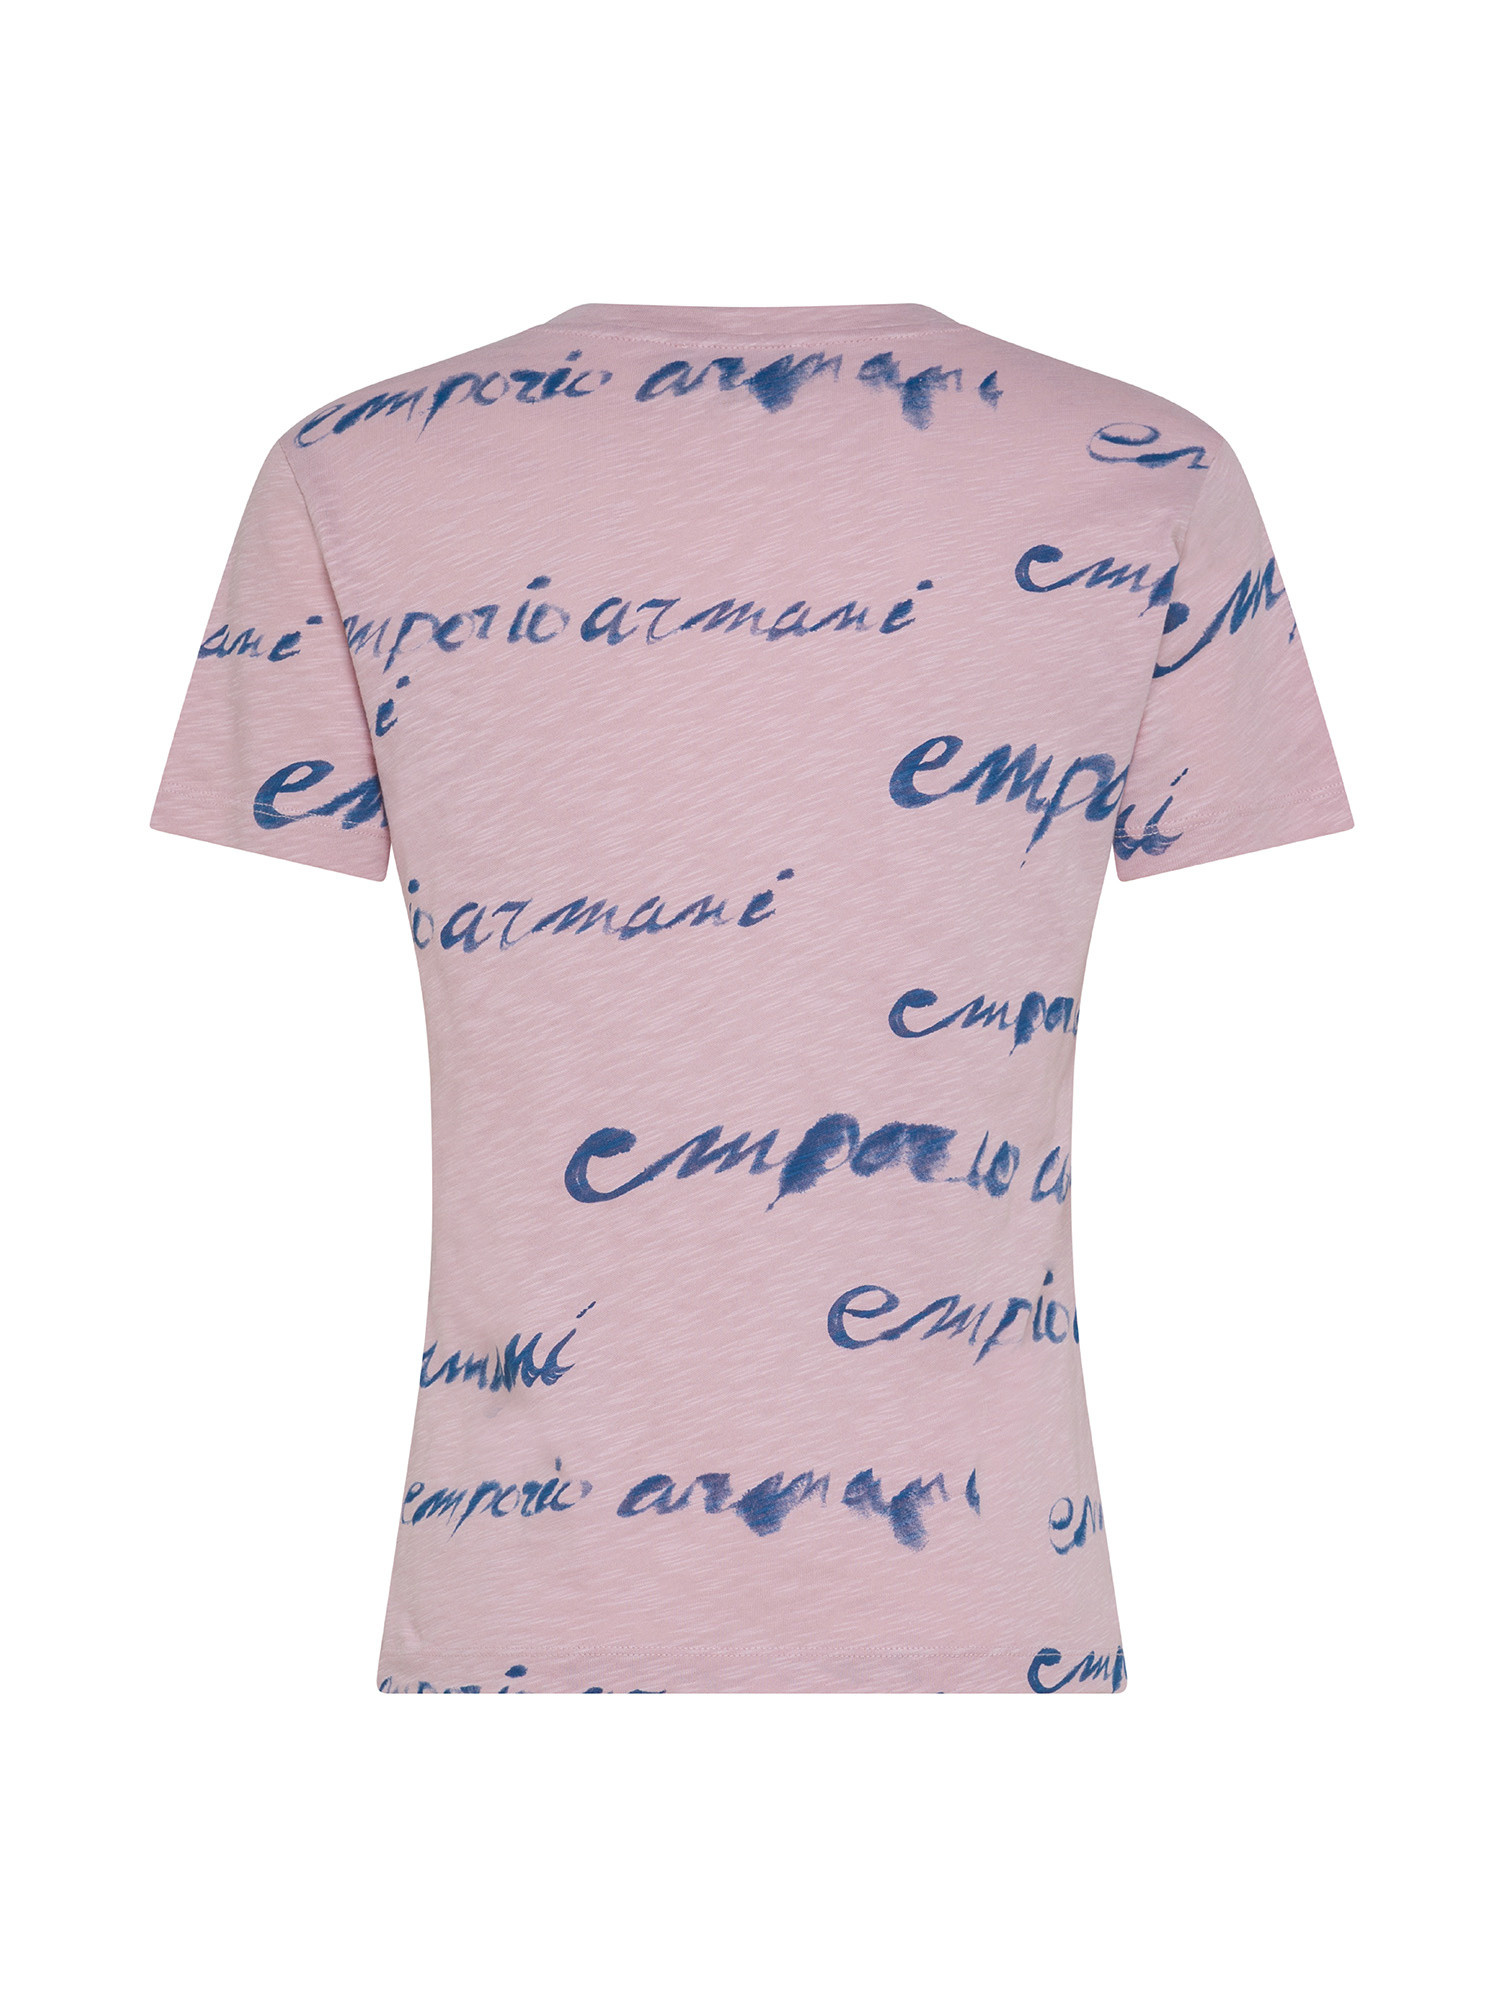 Emporio Armani - Cotton T-shirt with logo lettering, Pink, large image number 1